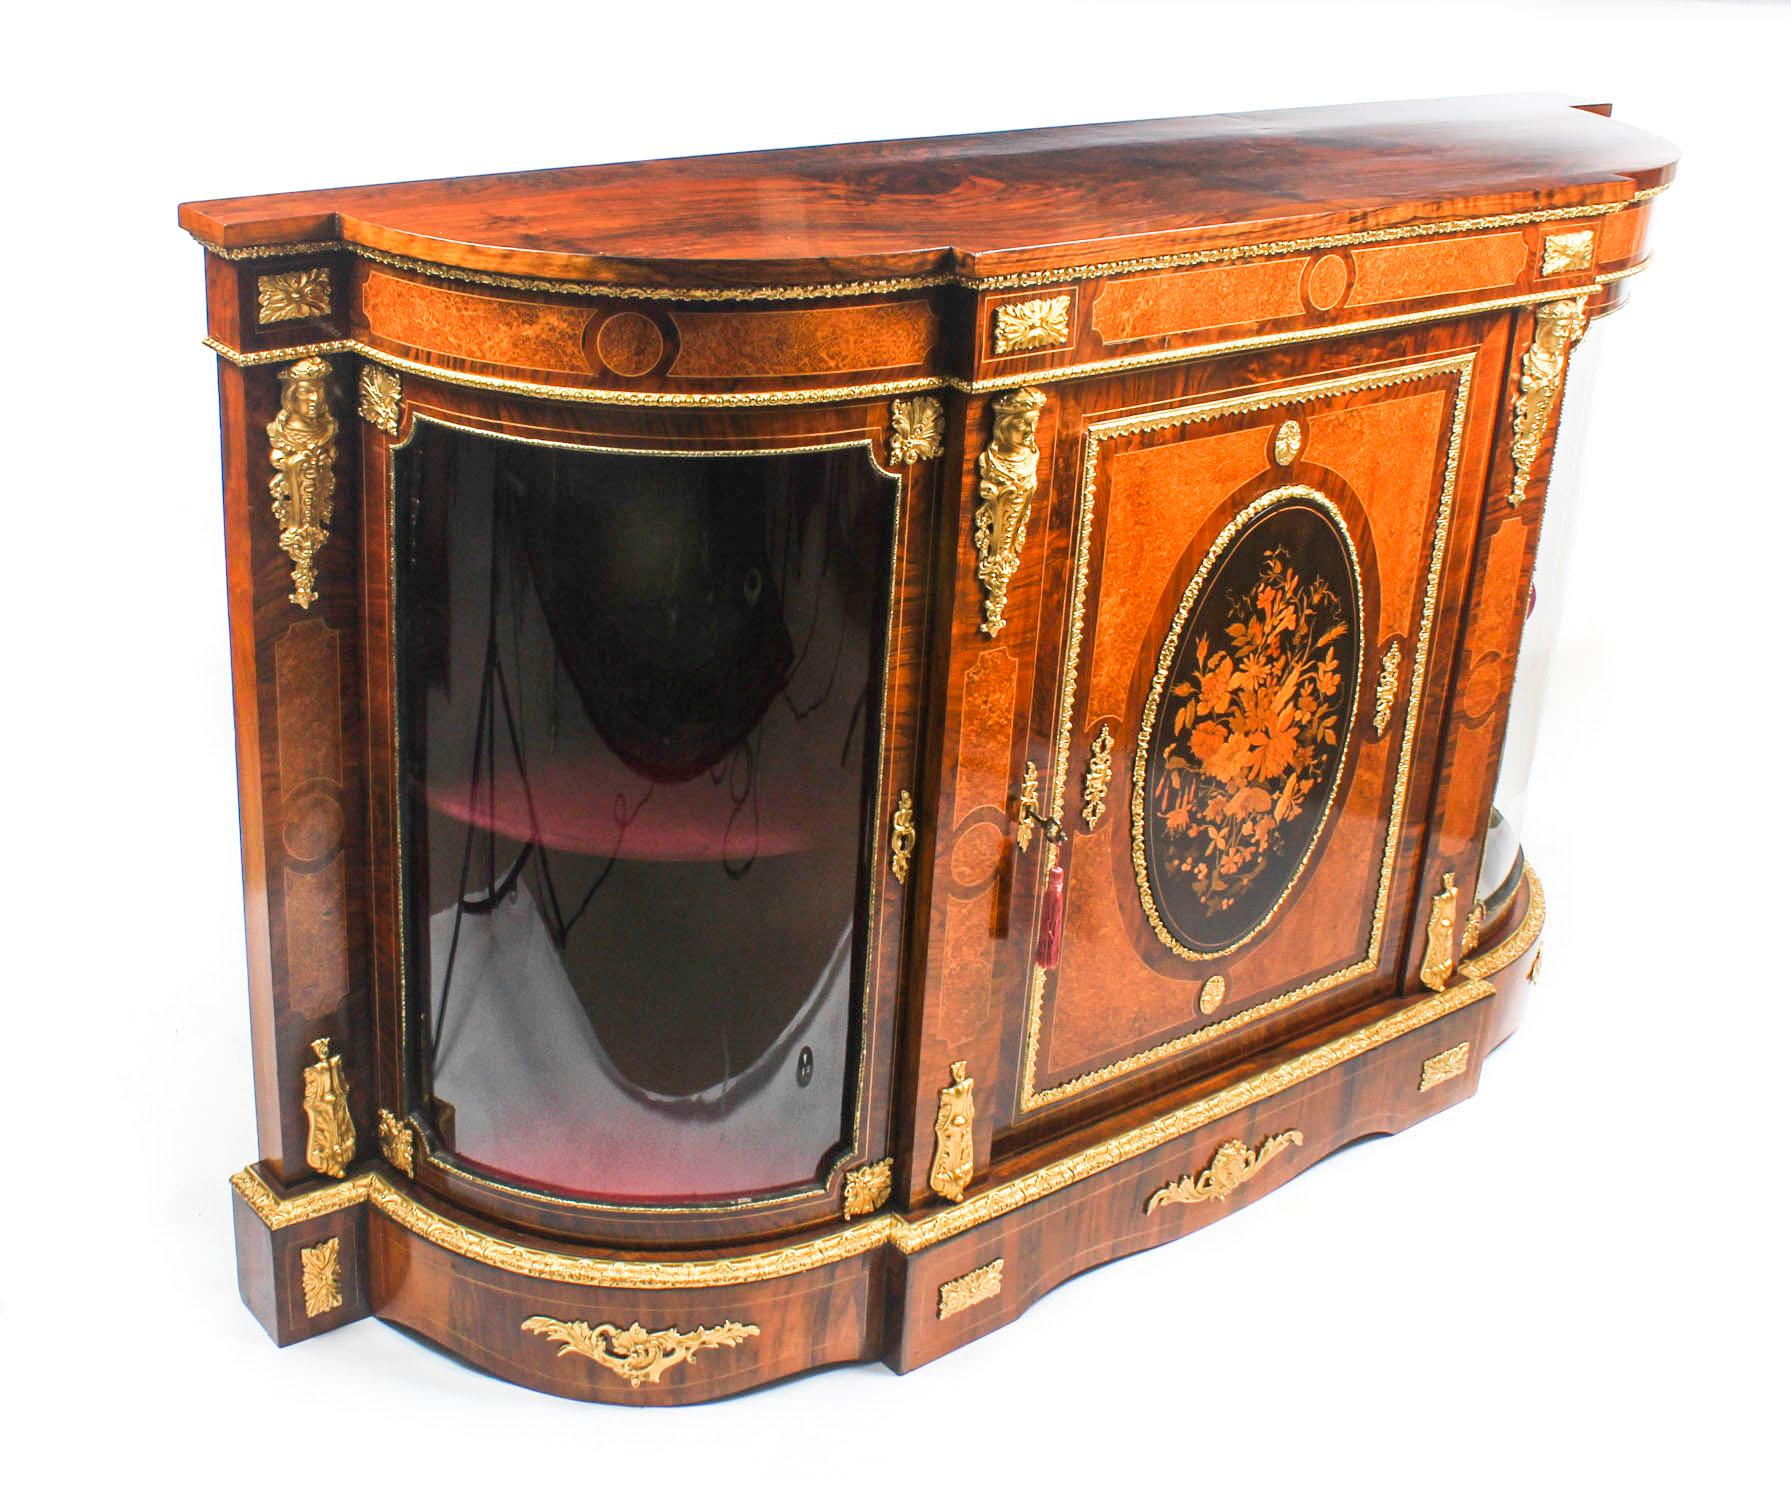 This is a superb antique Victorian burr walnut, amboyna and marquetry inlaid credenza, circa 1850 in date.

Oozing sophistication and charm, this credenza is the absolute epitome of Victorian High Society. Its attention to detail and lavish